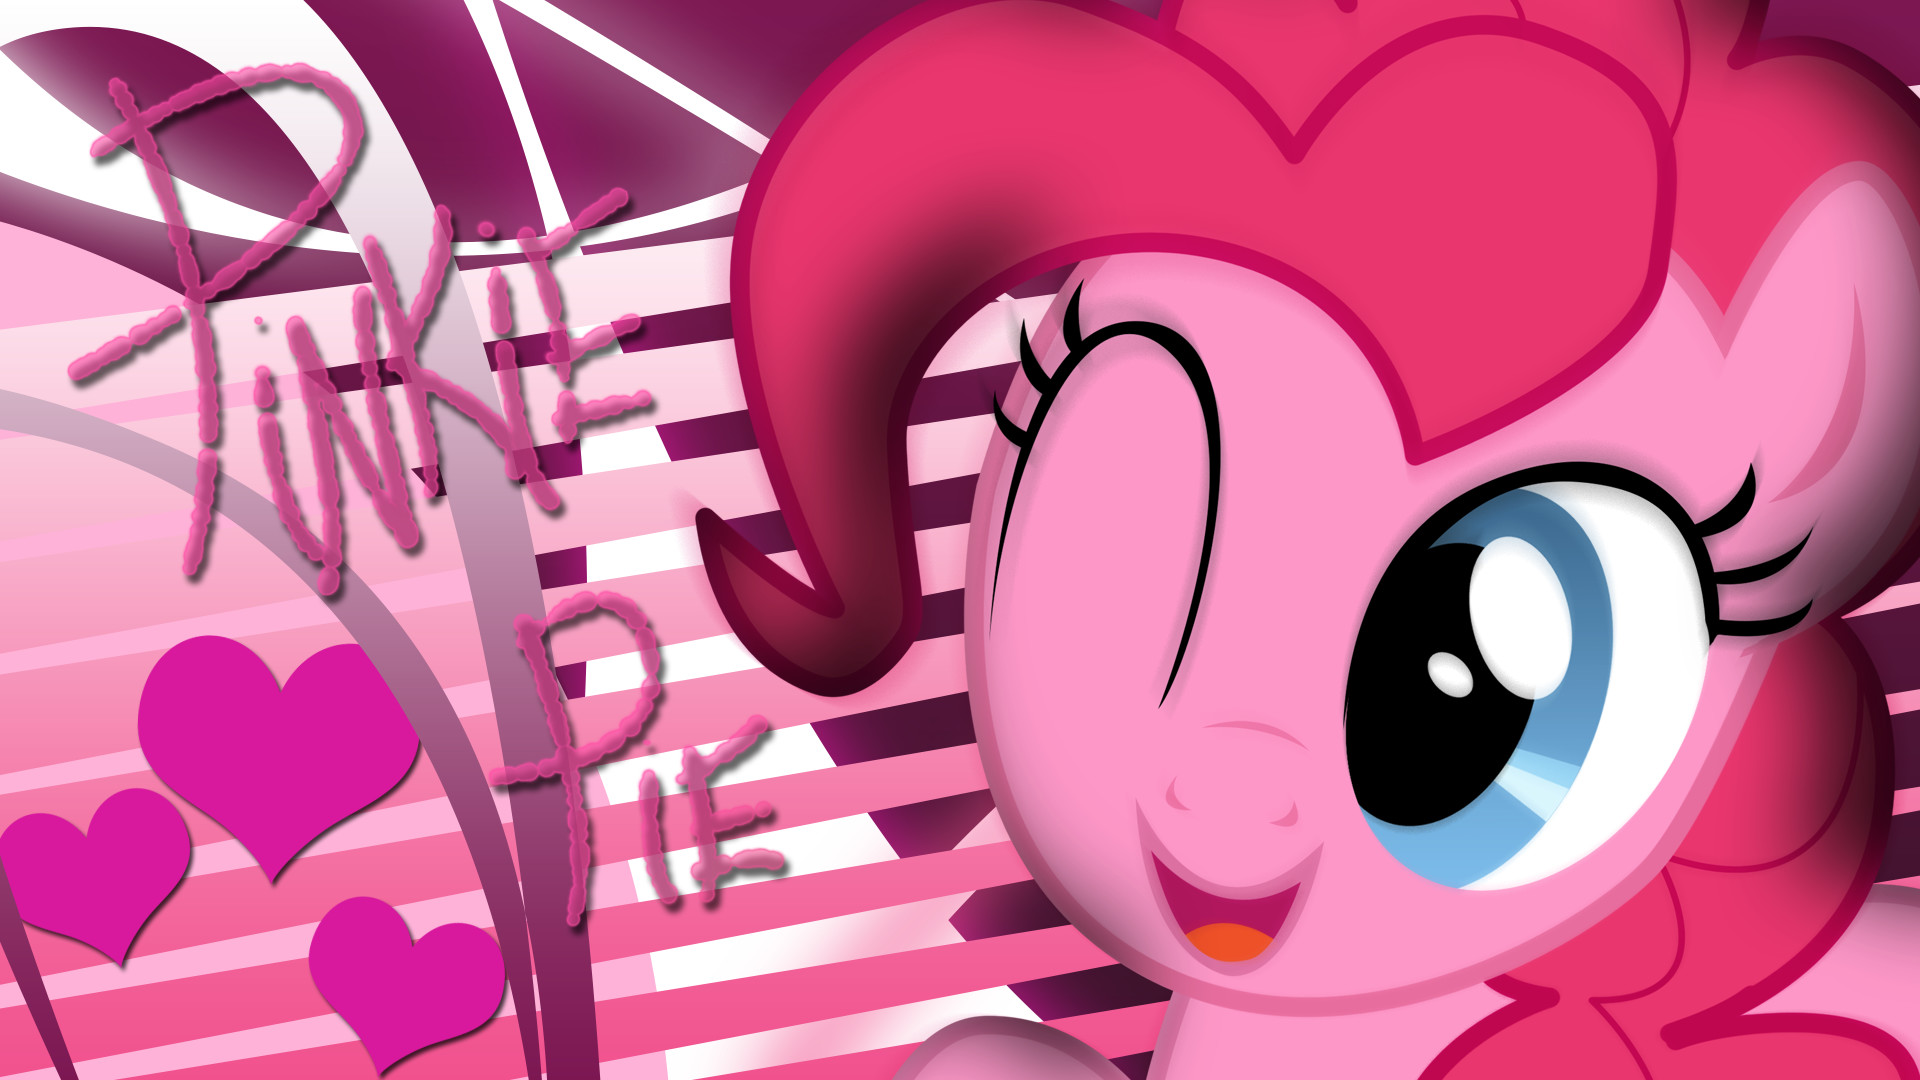 I love Pinkie Pie she is so cute and sexy xD Pinkie Pie Wallpaper (  Laughter )